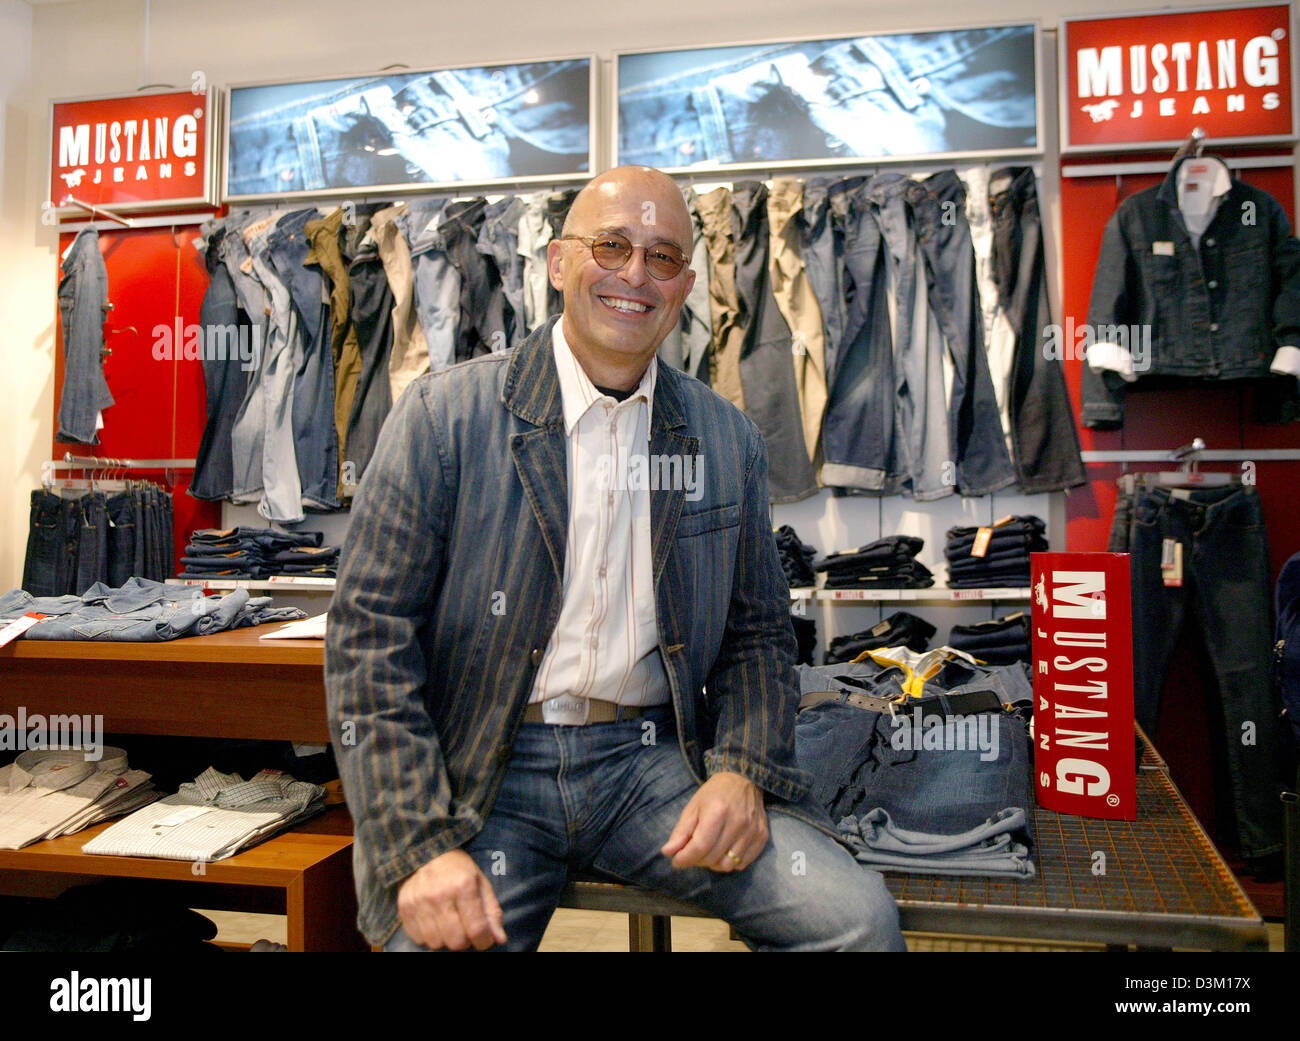 dpa file) - Mustang Jeans managing director Heiner Sefranek smiles in front  of Mustag Jeans products in